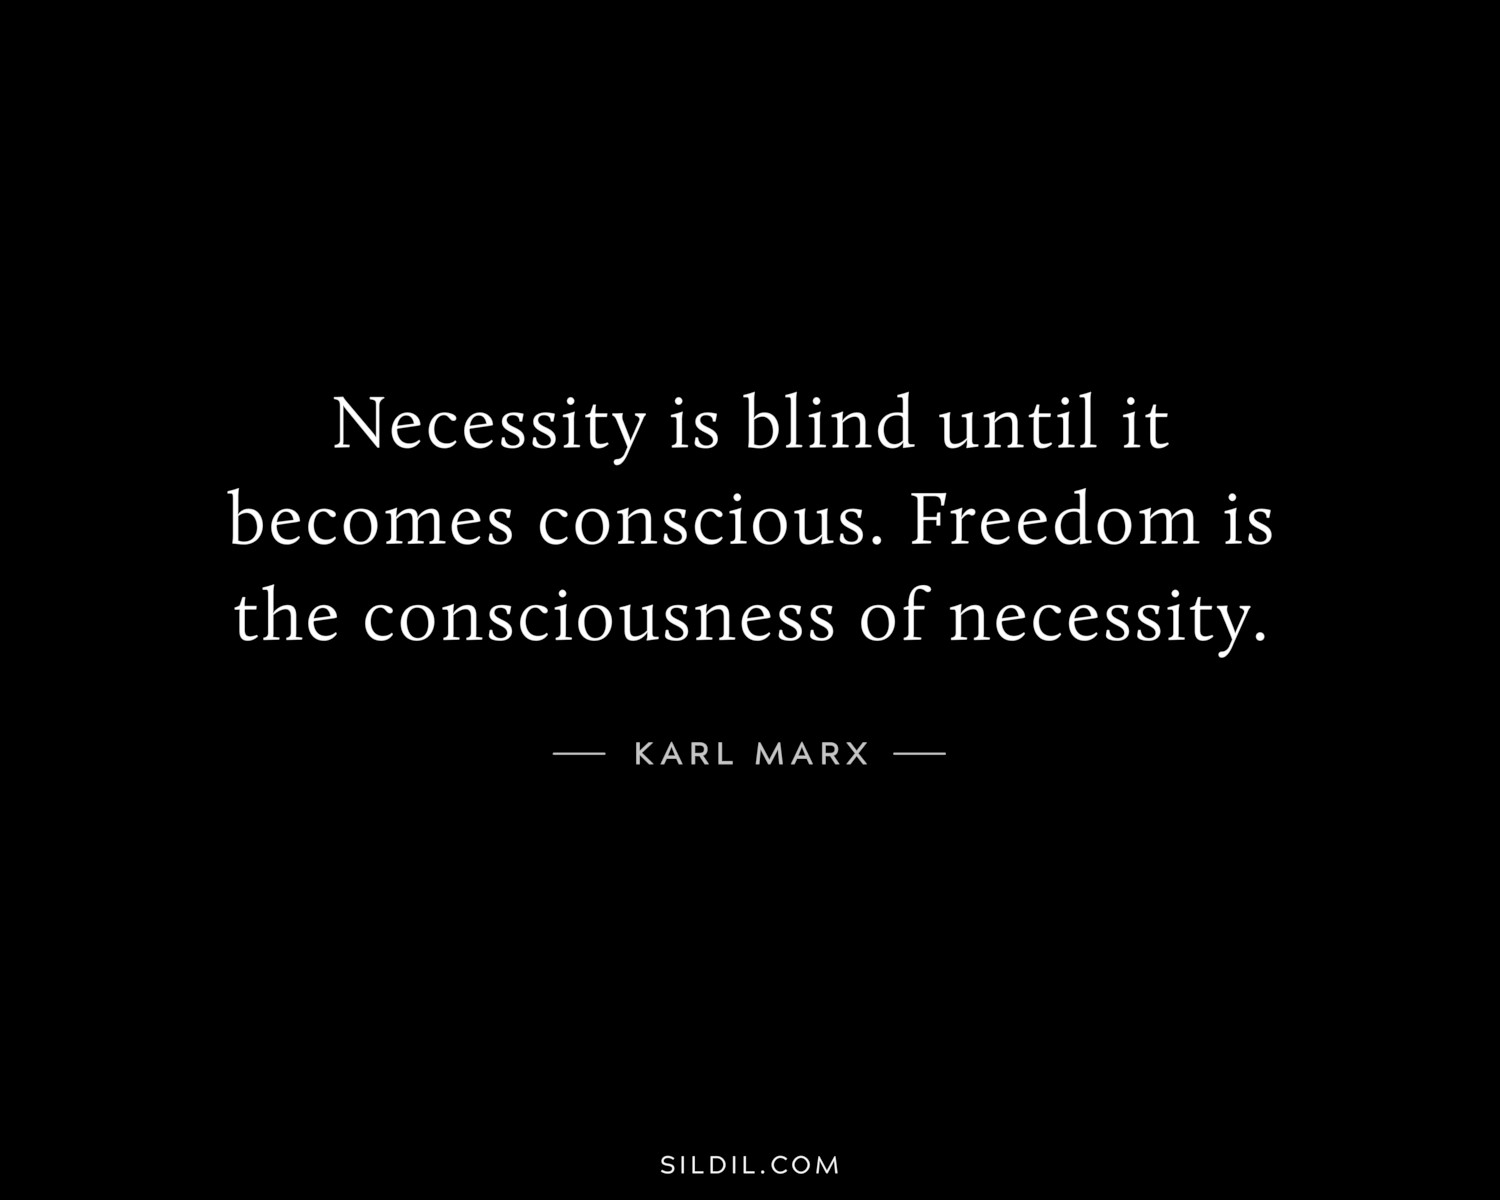 Necessity is blind until it becomes conscious. Freedom is the consciousness of necessity.